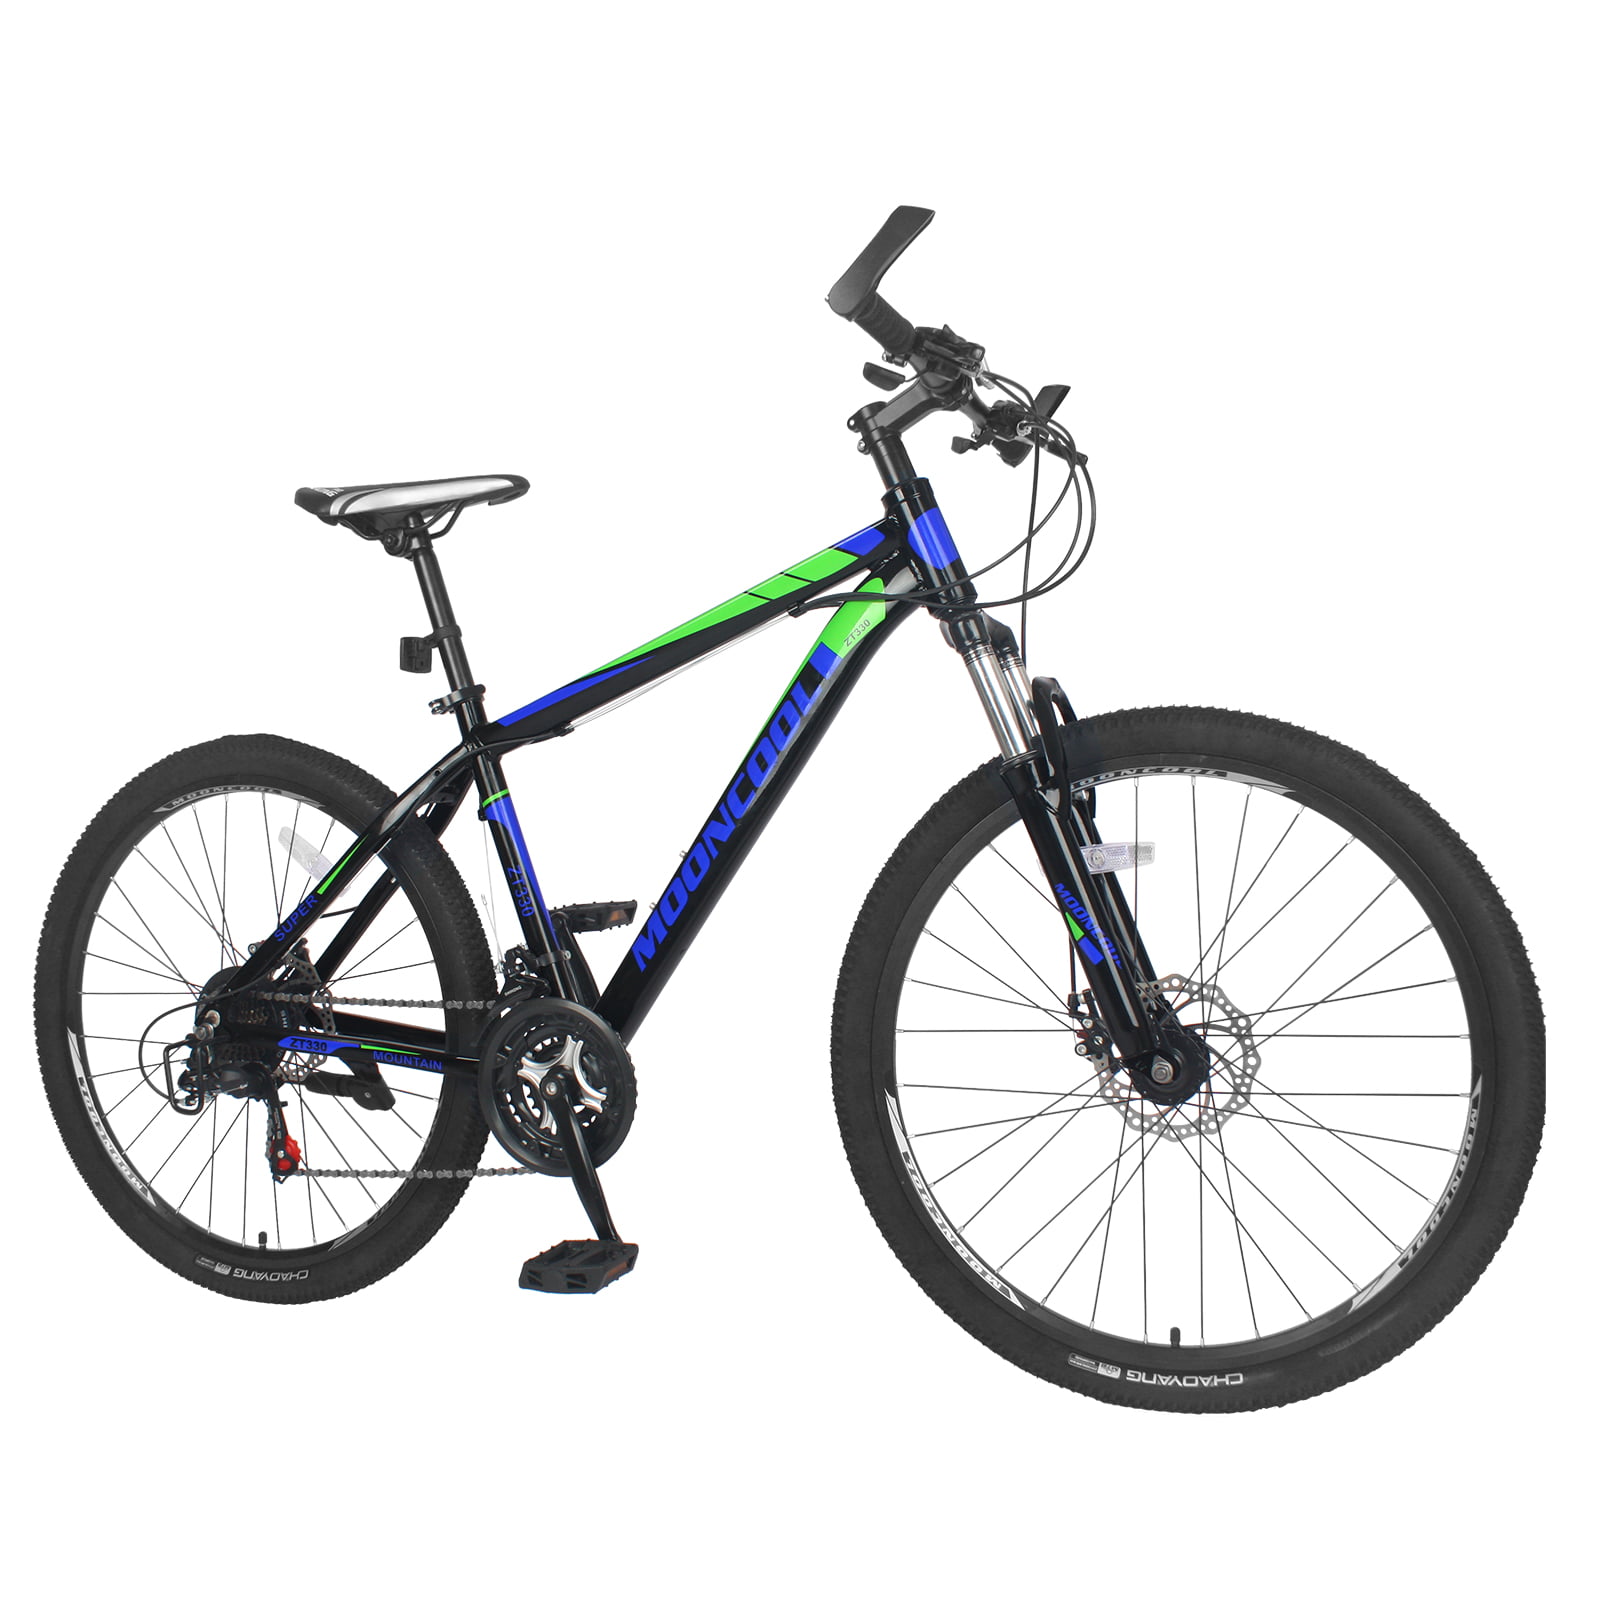 Details about   20 inch Teens Children's Mountain Bike Cycling MTB Bicycle For Boys Girls Gifts 